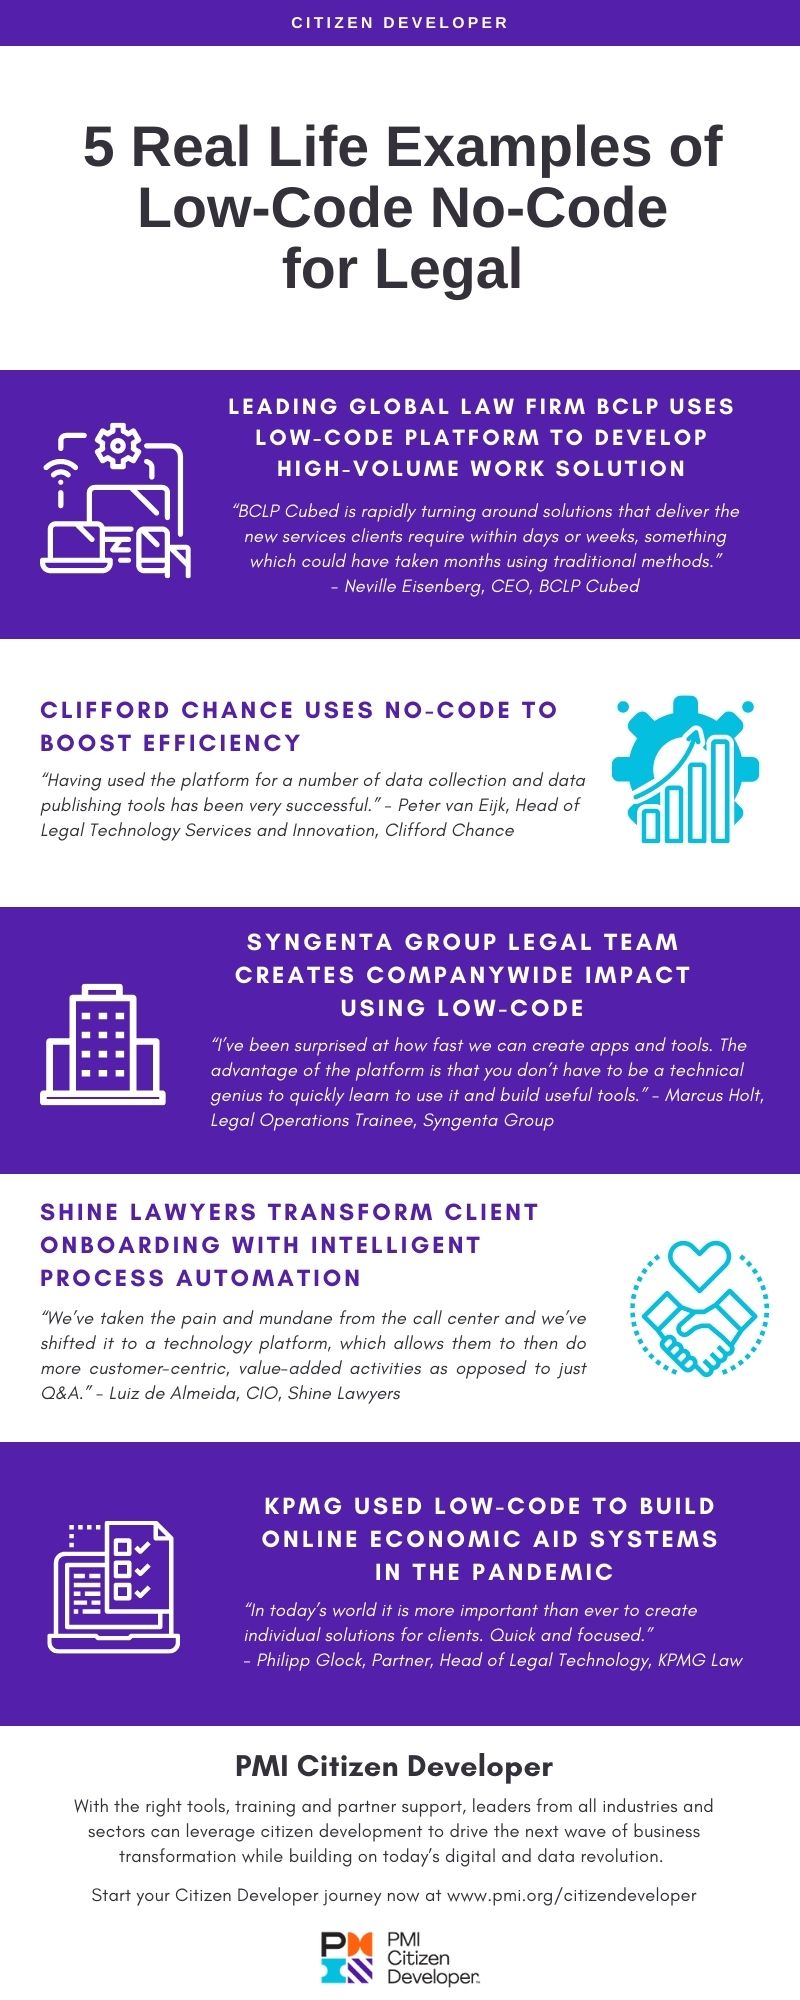  - 5 Low-Code/No-Code Real Life Examples for Legal  [Infographic]